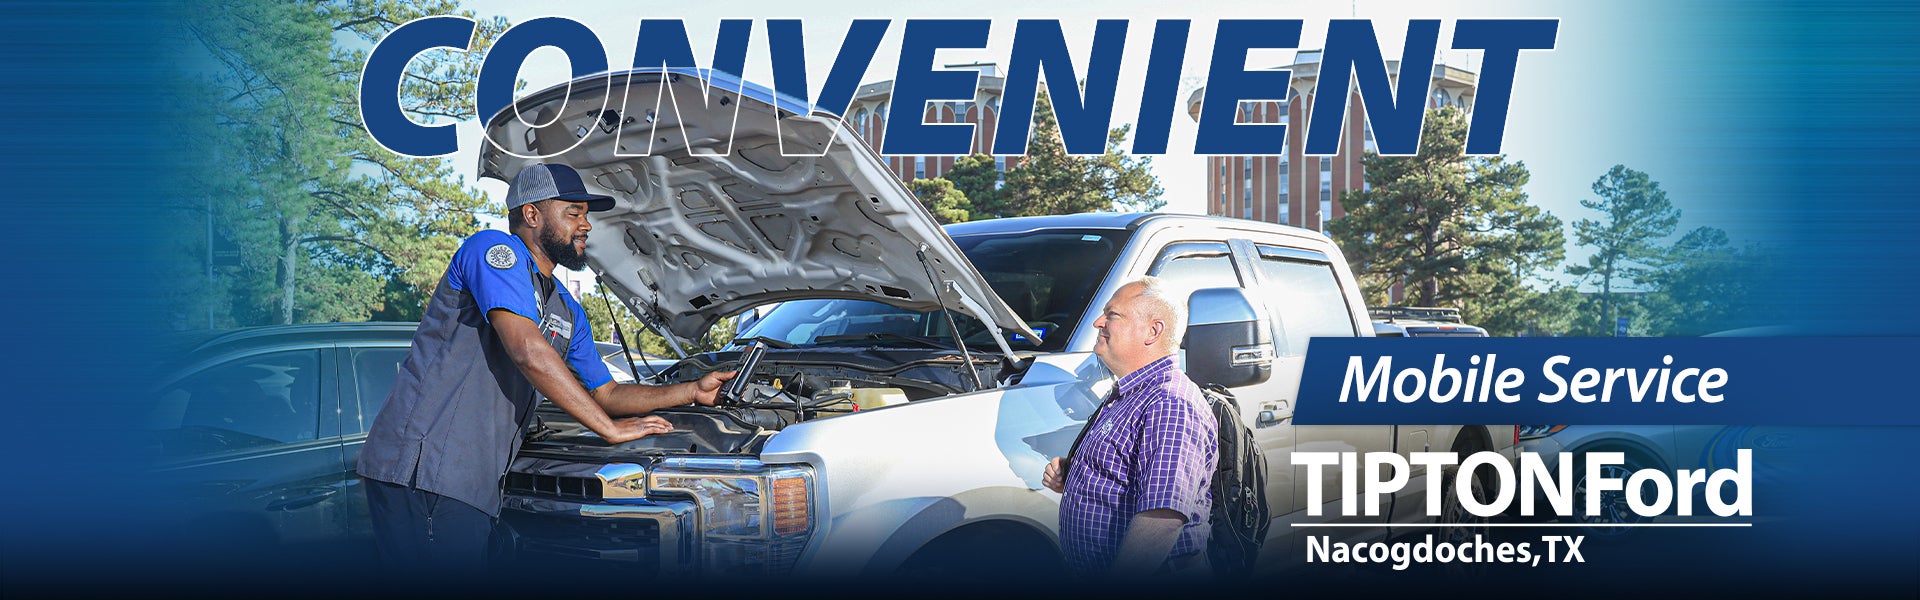 Tipton Ford offers convenient Mobile Service.